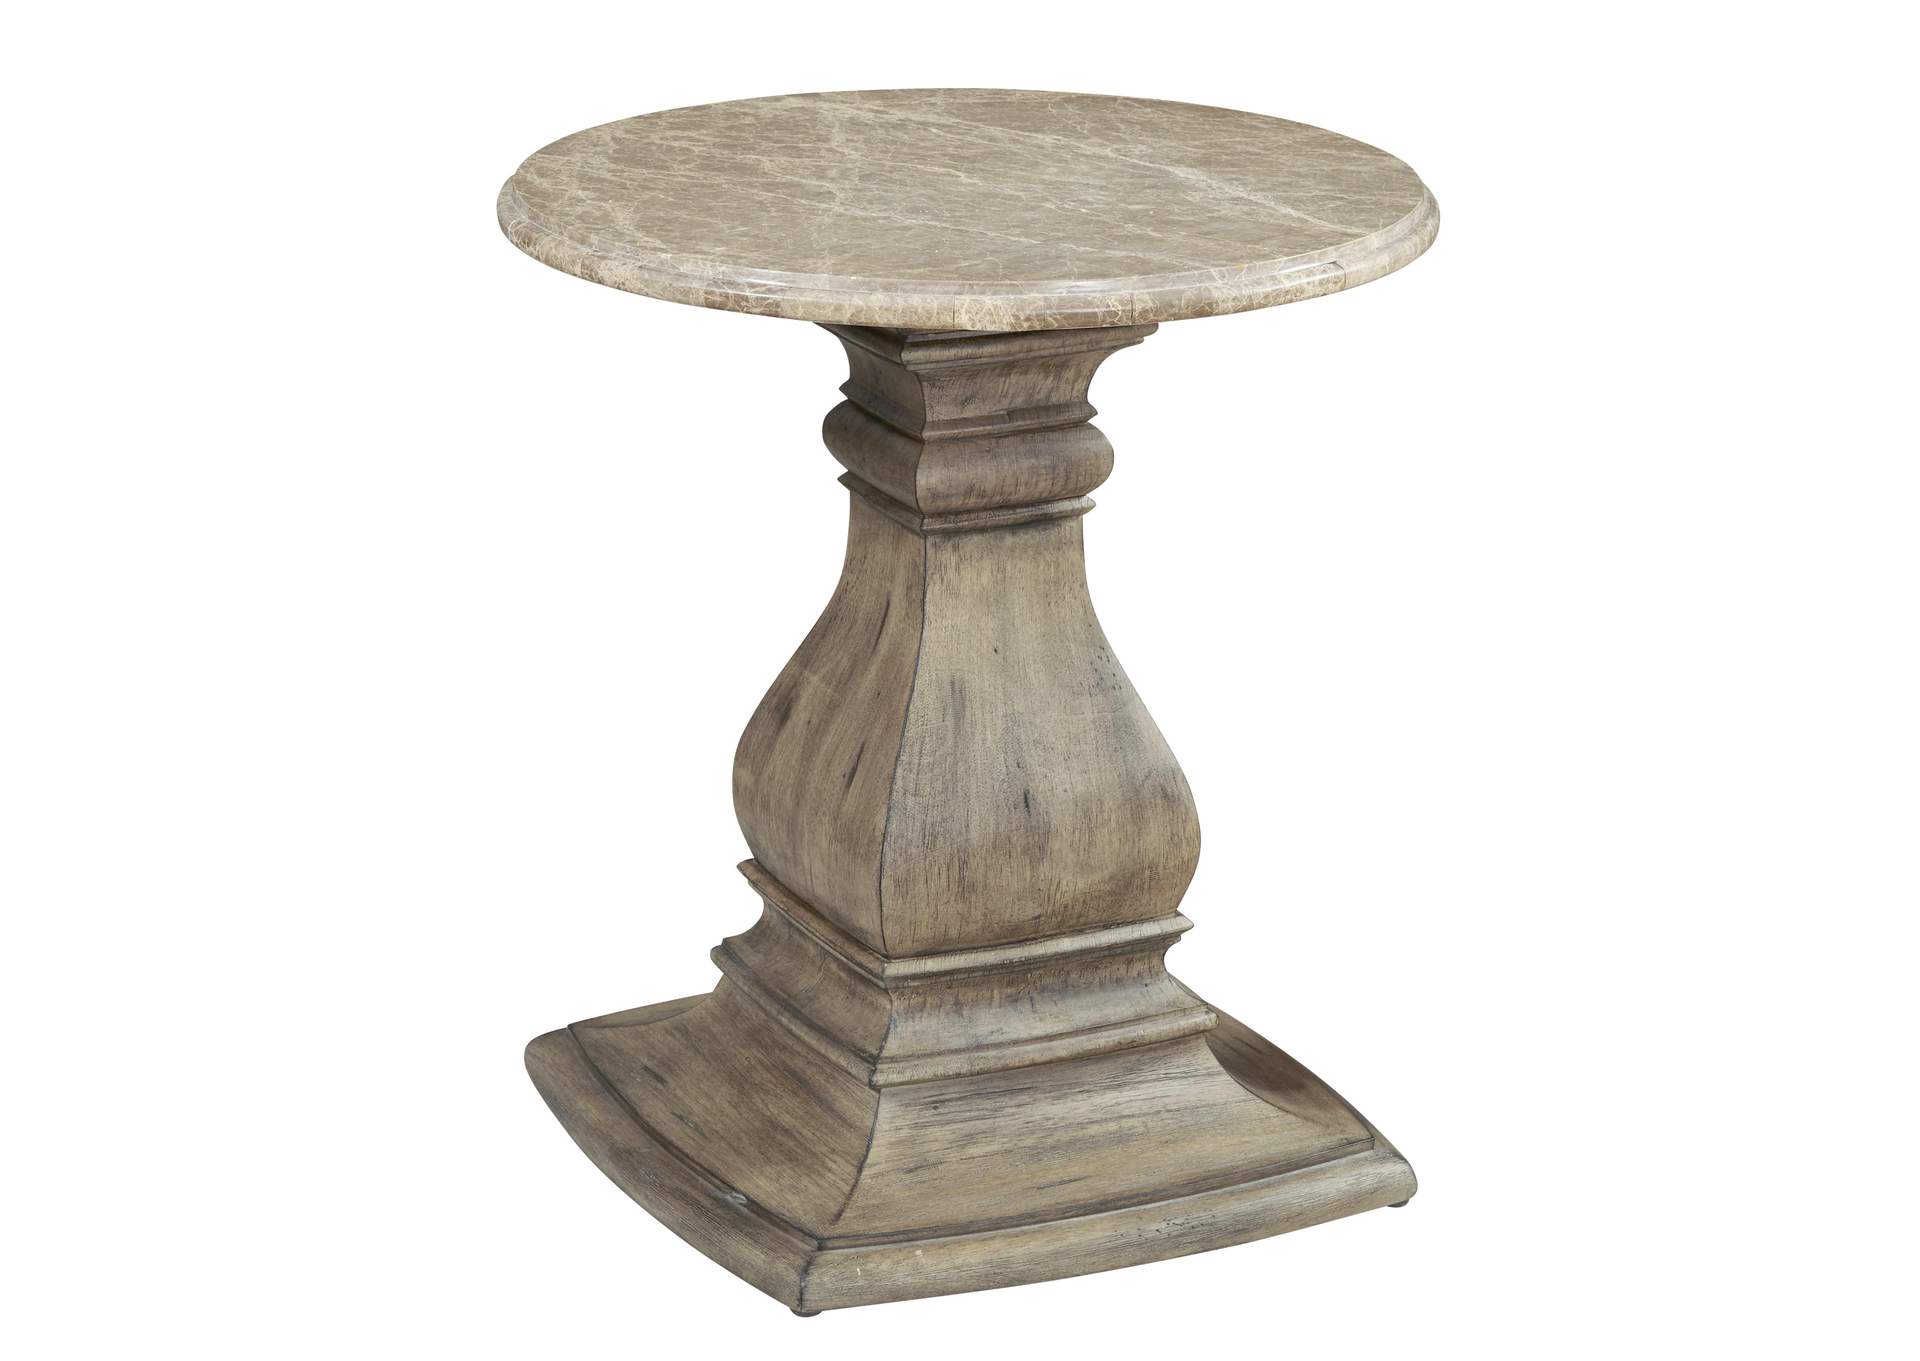 Garrison Cove Round End Table with Stone Top,Pulaski Furniture